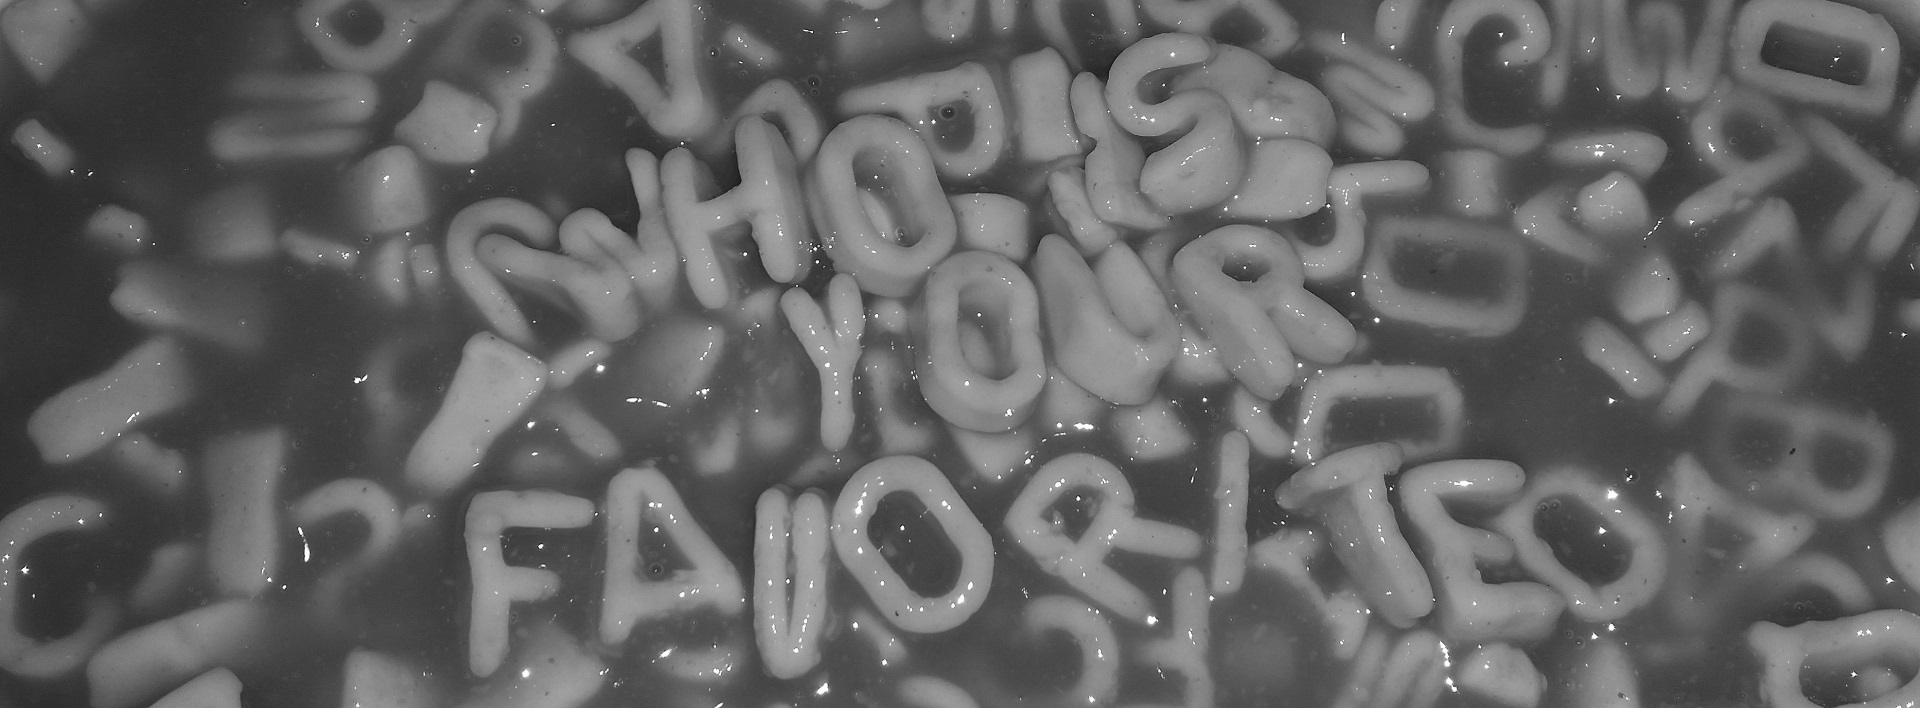 Alphabet spaghetti with, "who is your favourite", spelled out